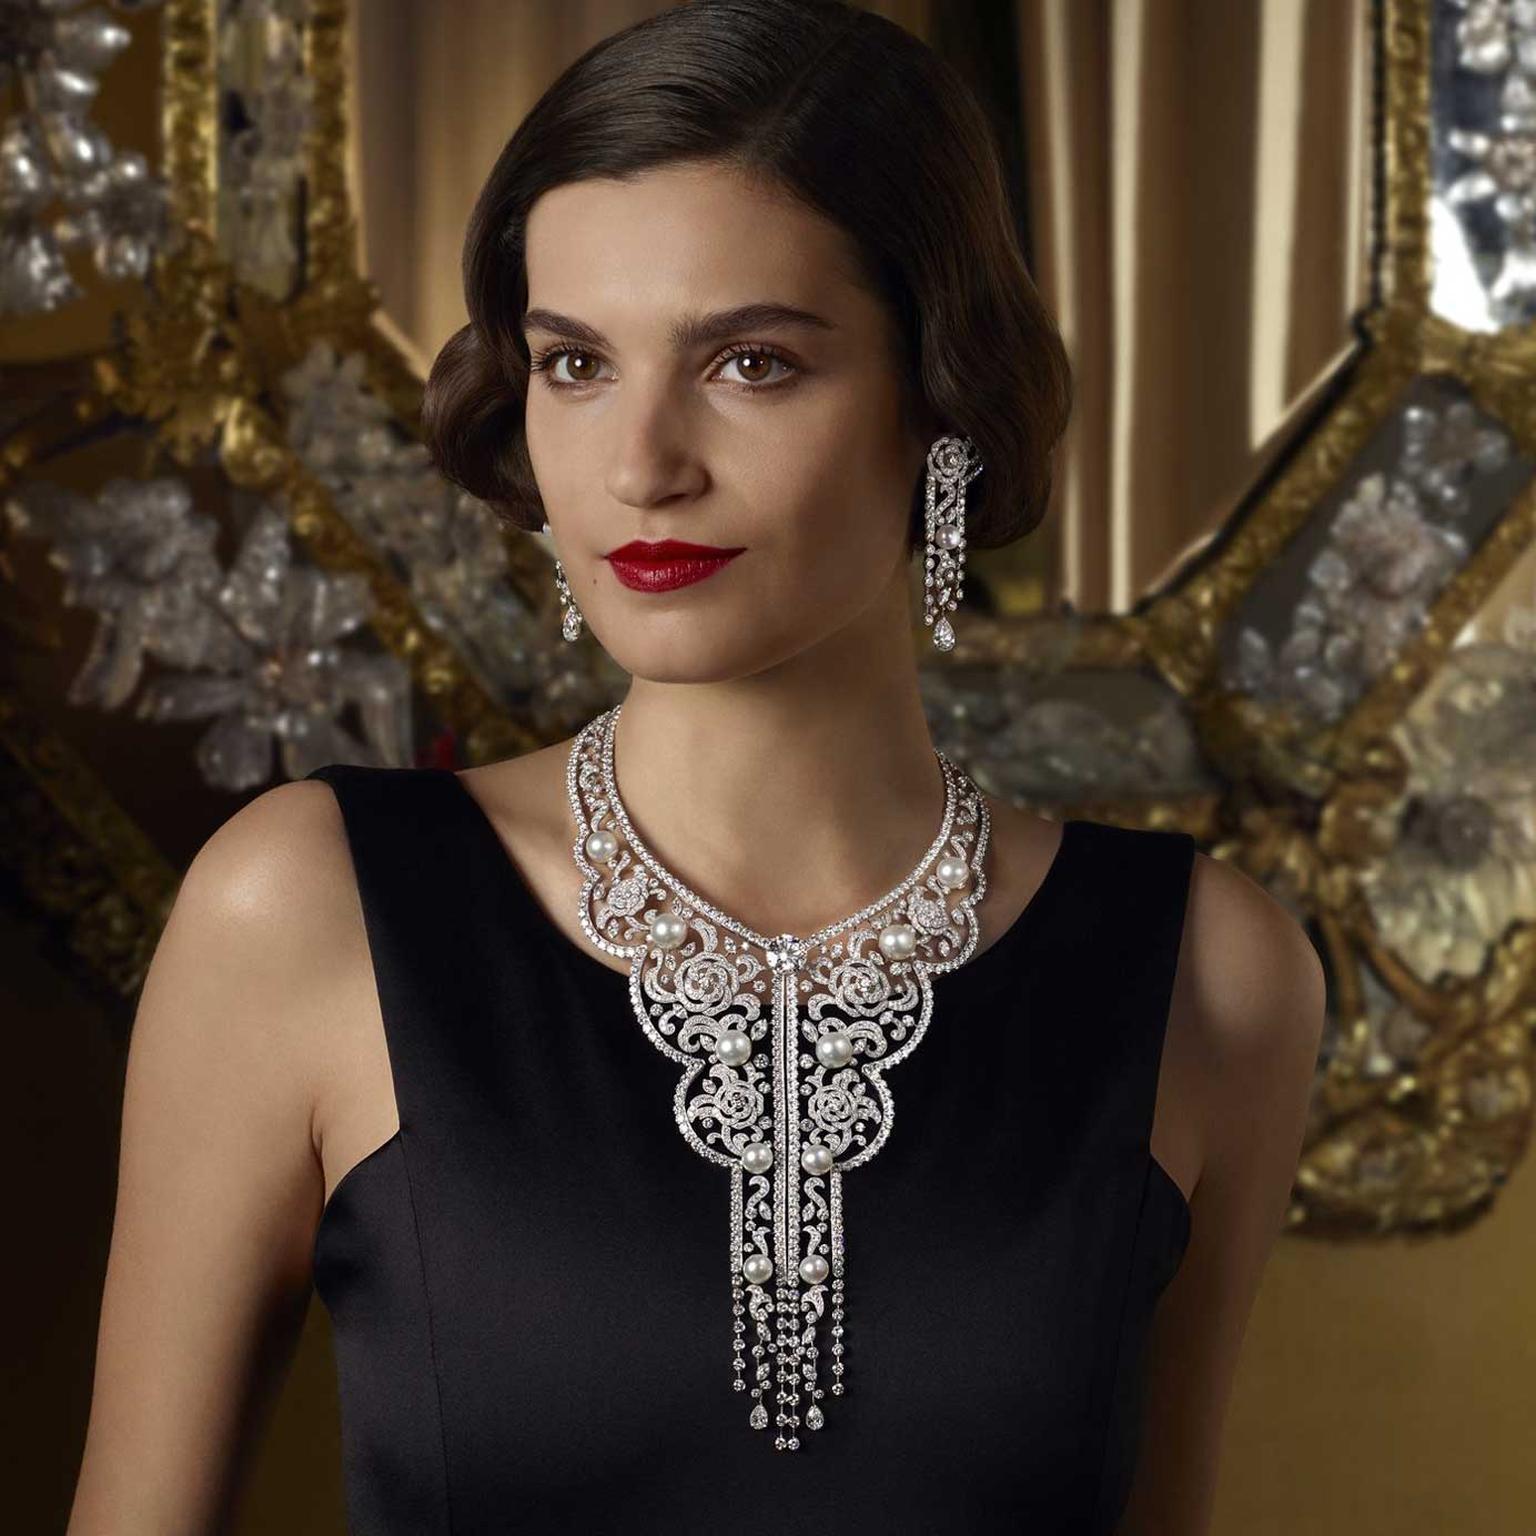 CHANEL High Jewelry Collection N5  Sandras Closet